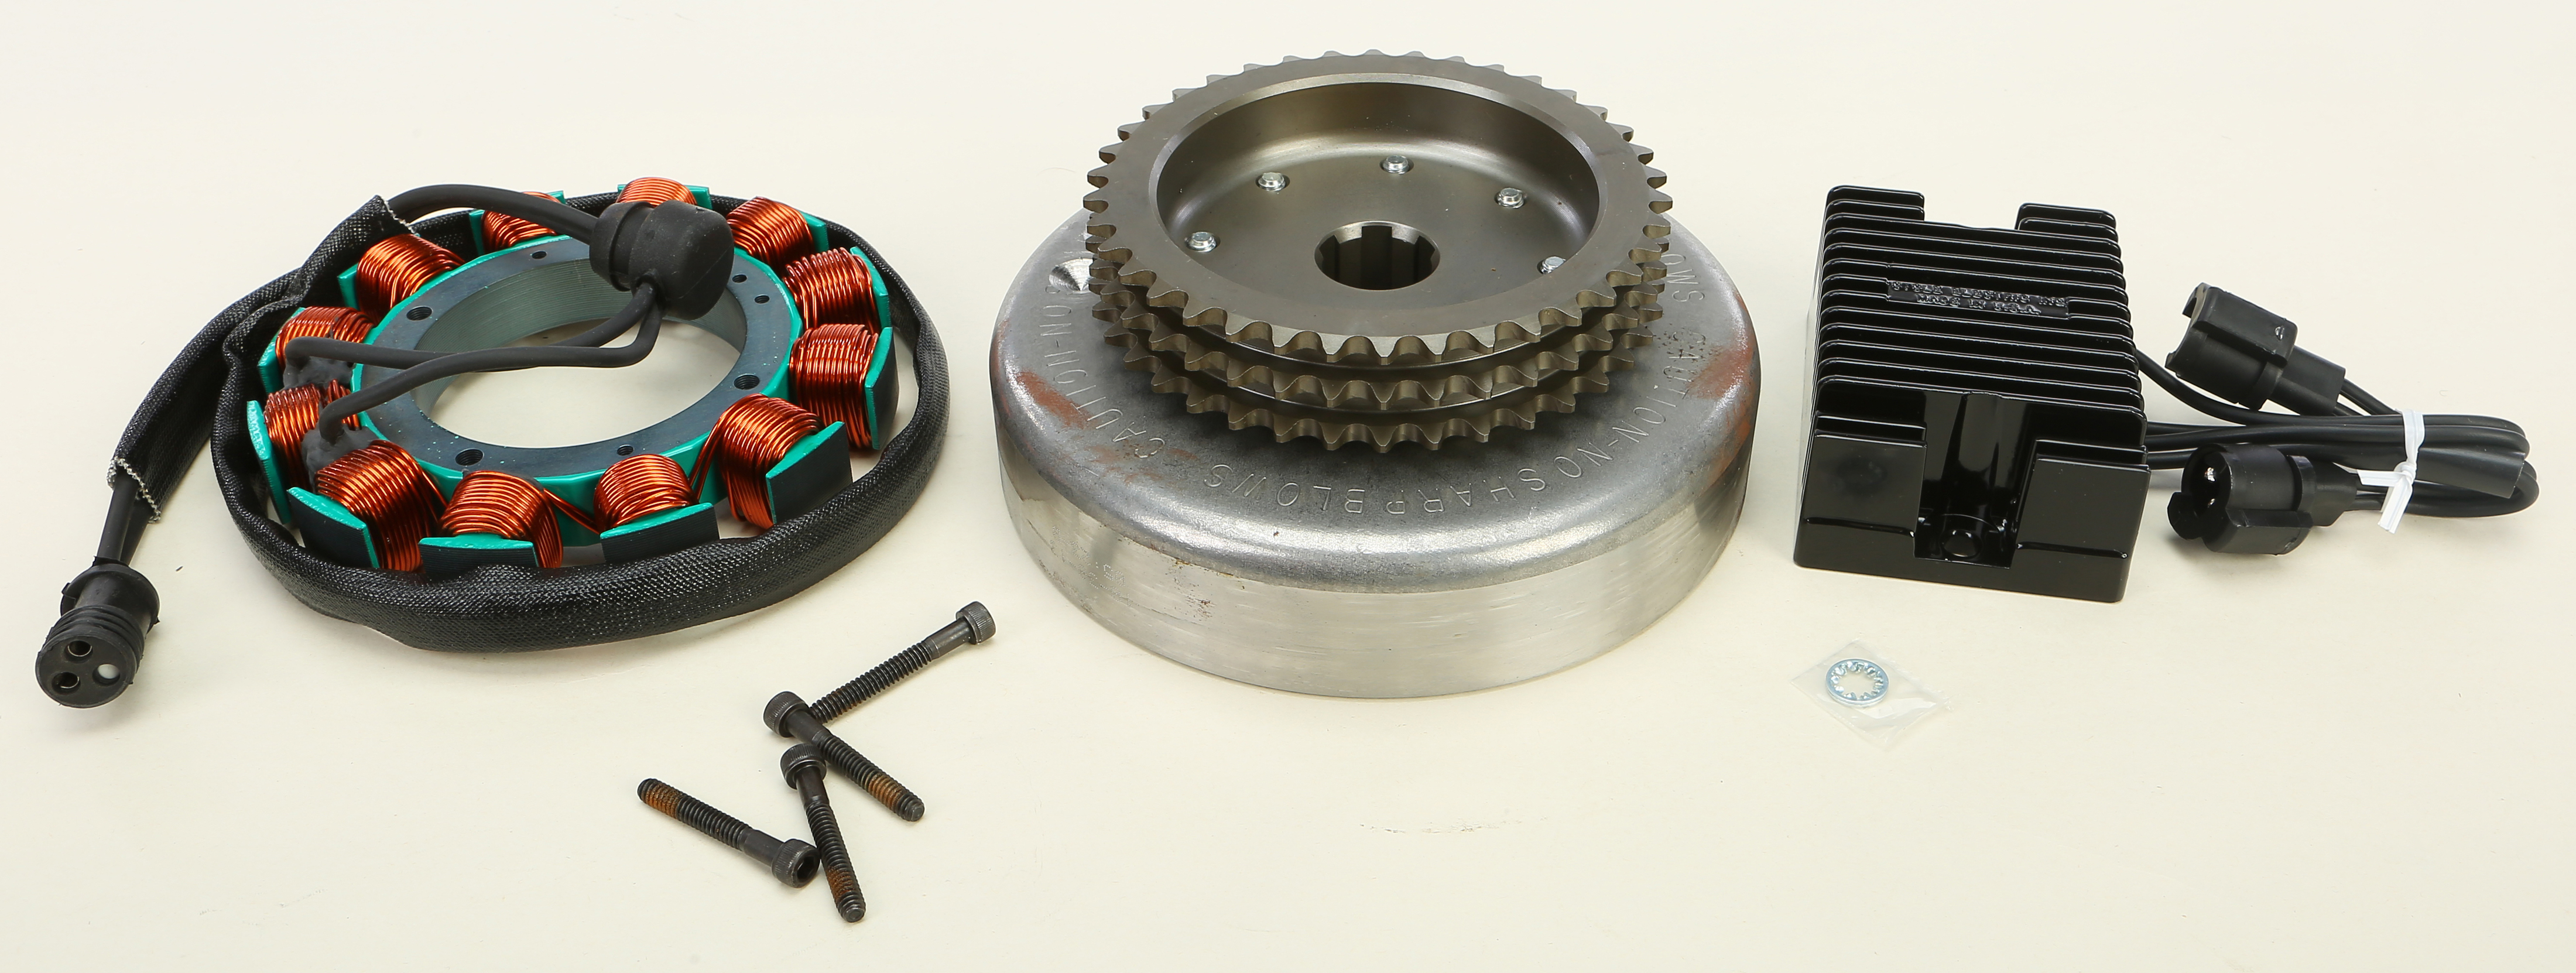 Alternator Kit - For 07-08 Harley XL1200 Sportster - Click Image to Close